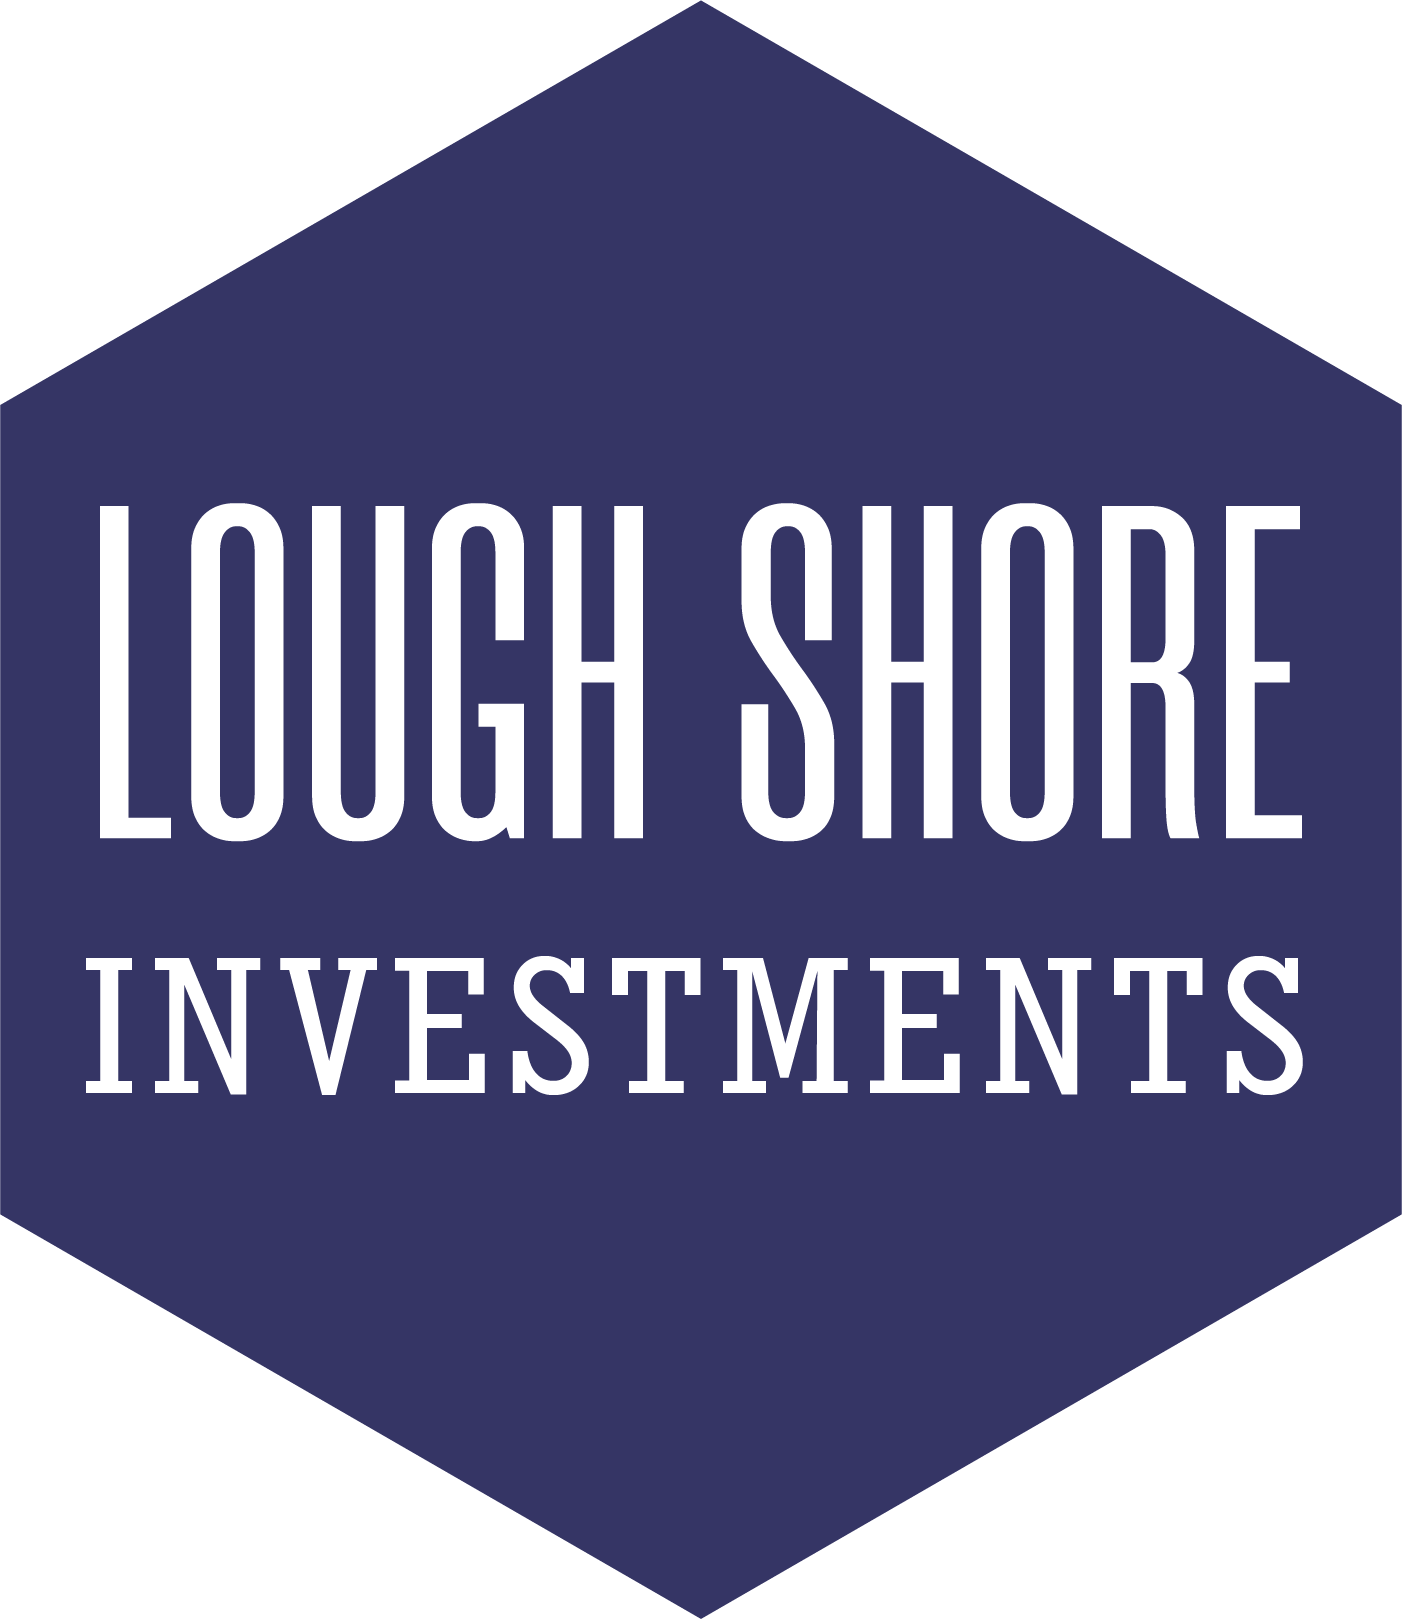 Loughshore Investment